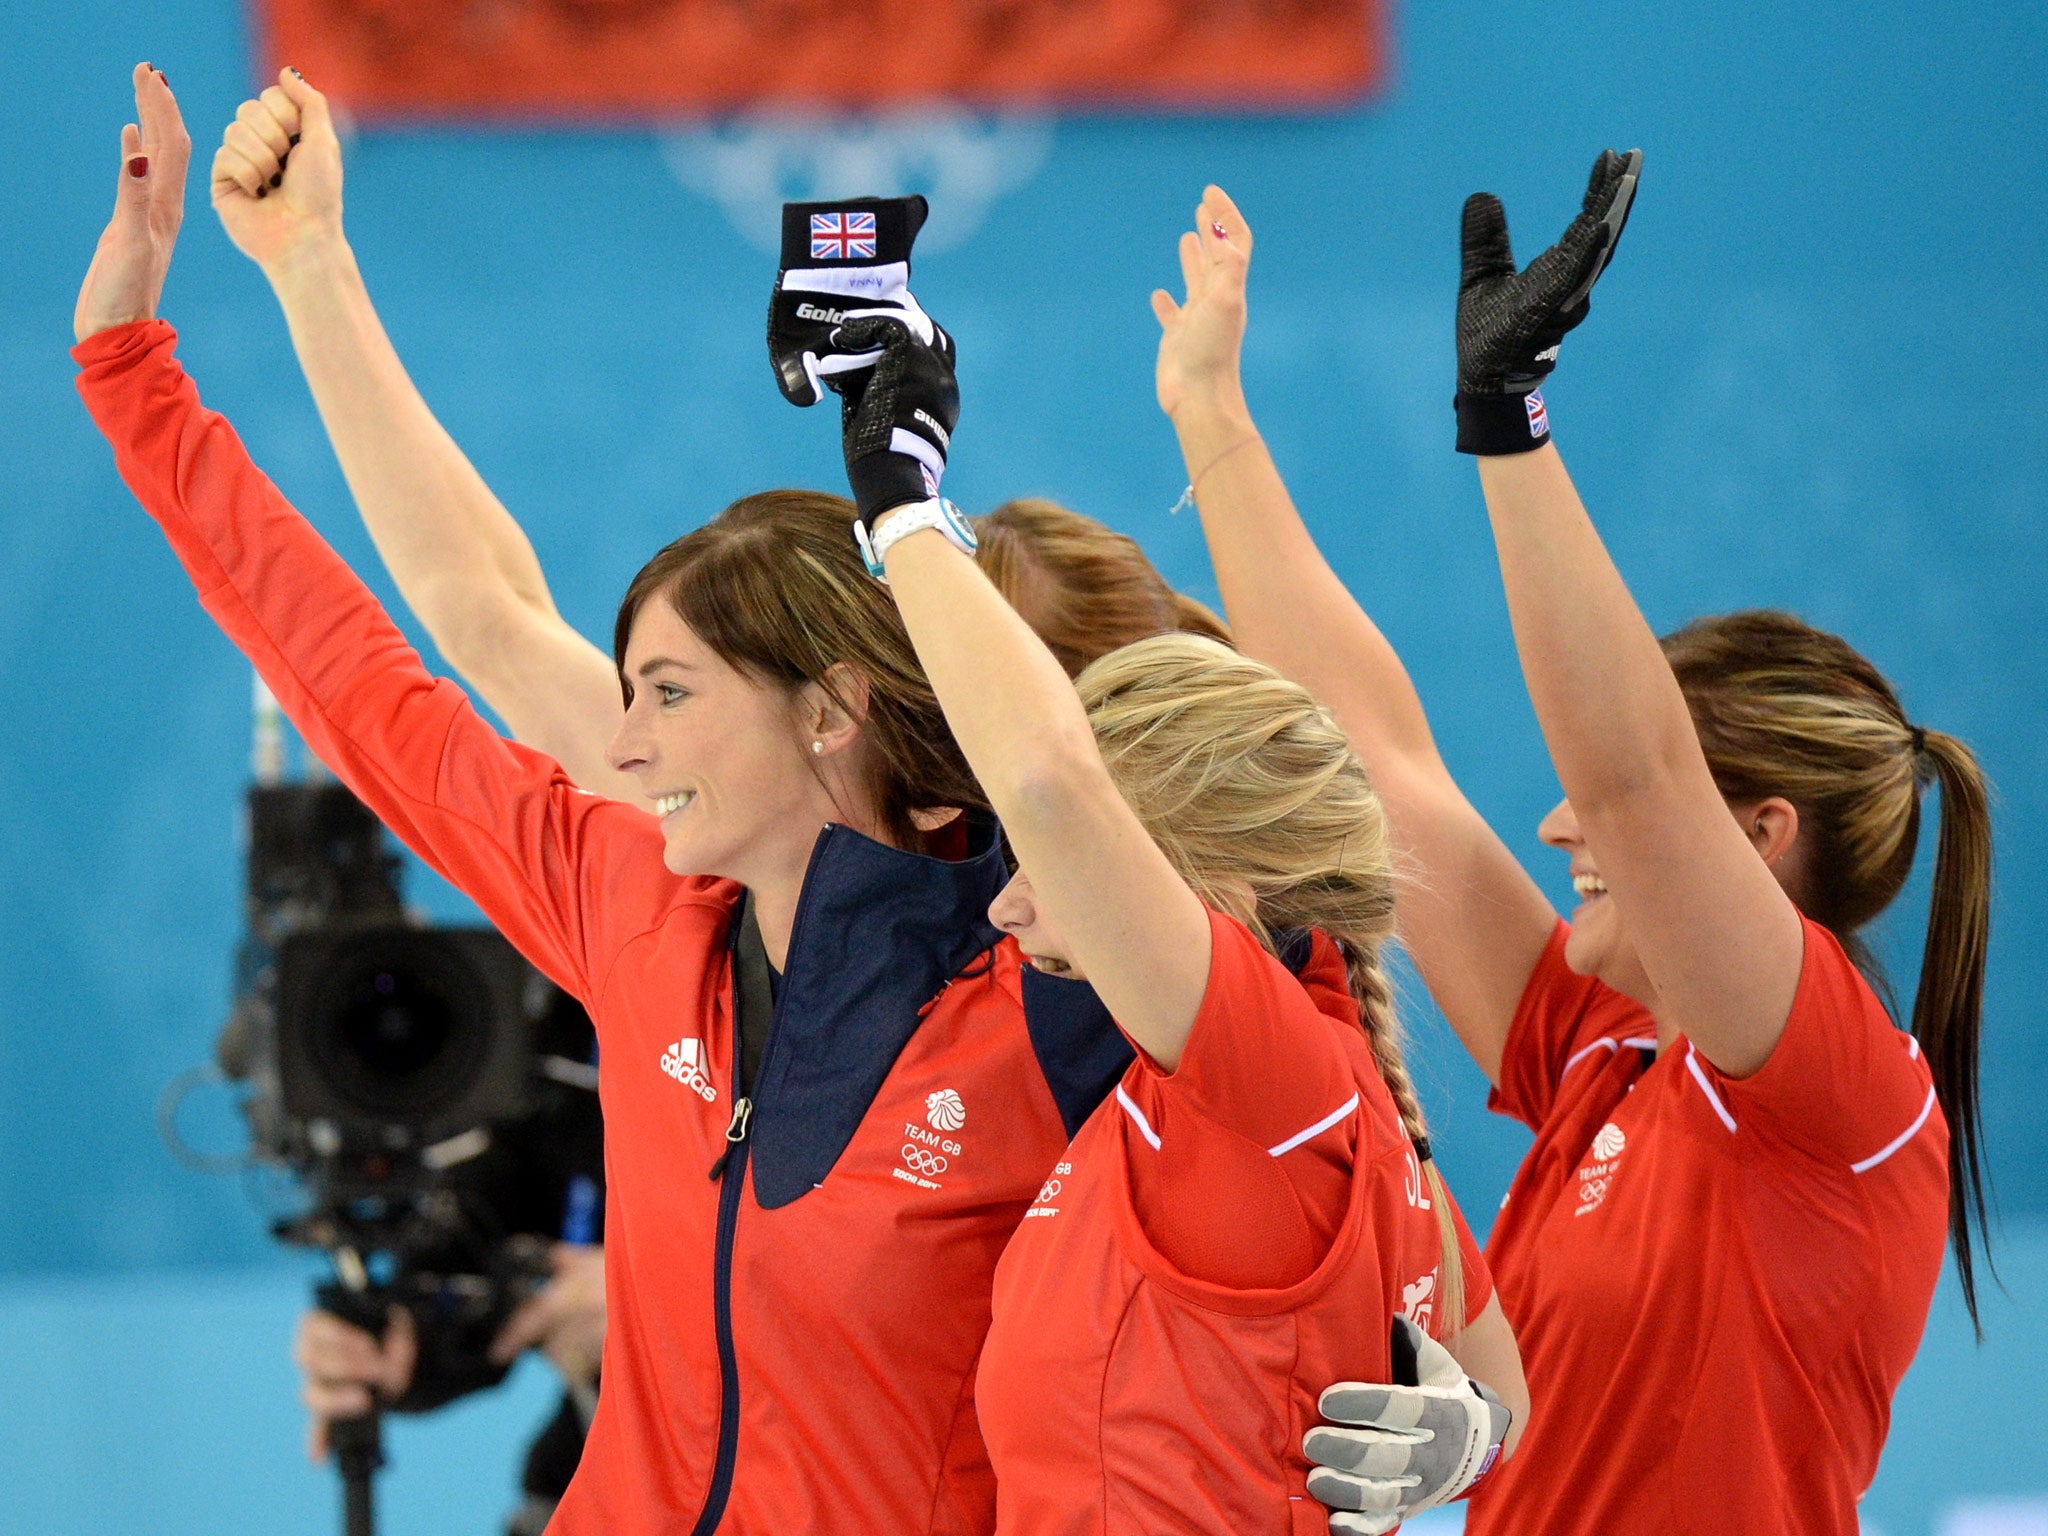 Great Britain's Anna Sloan, Eve Muirhead, Vicki Adams and Claire Hamilton celebrate after winning the Women's Curling Bronze Medal Game at the Ice Cube Curling Center